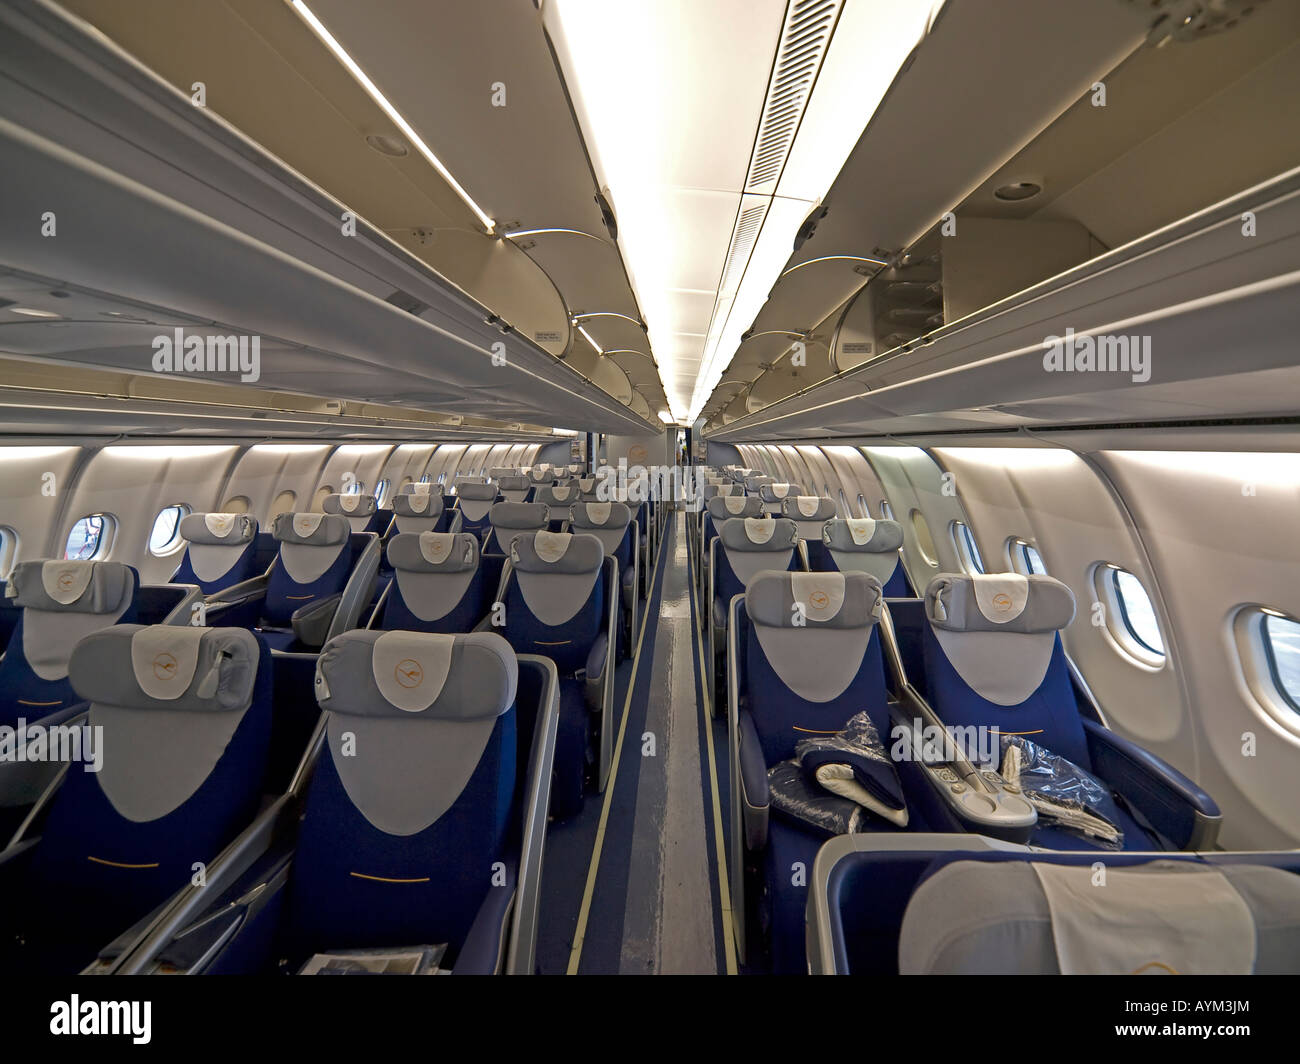 interior view in an aeroplane Airbus A 340 cabin seats business class Lufthansa Stock Photo